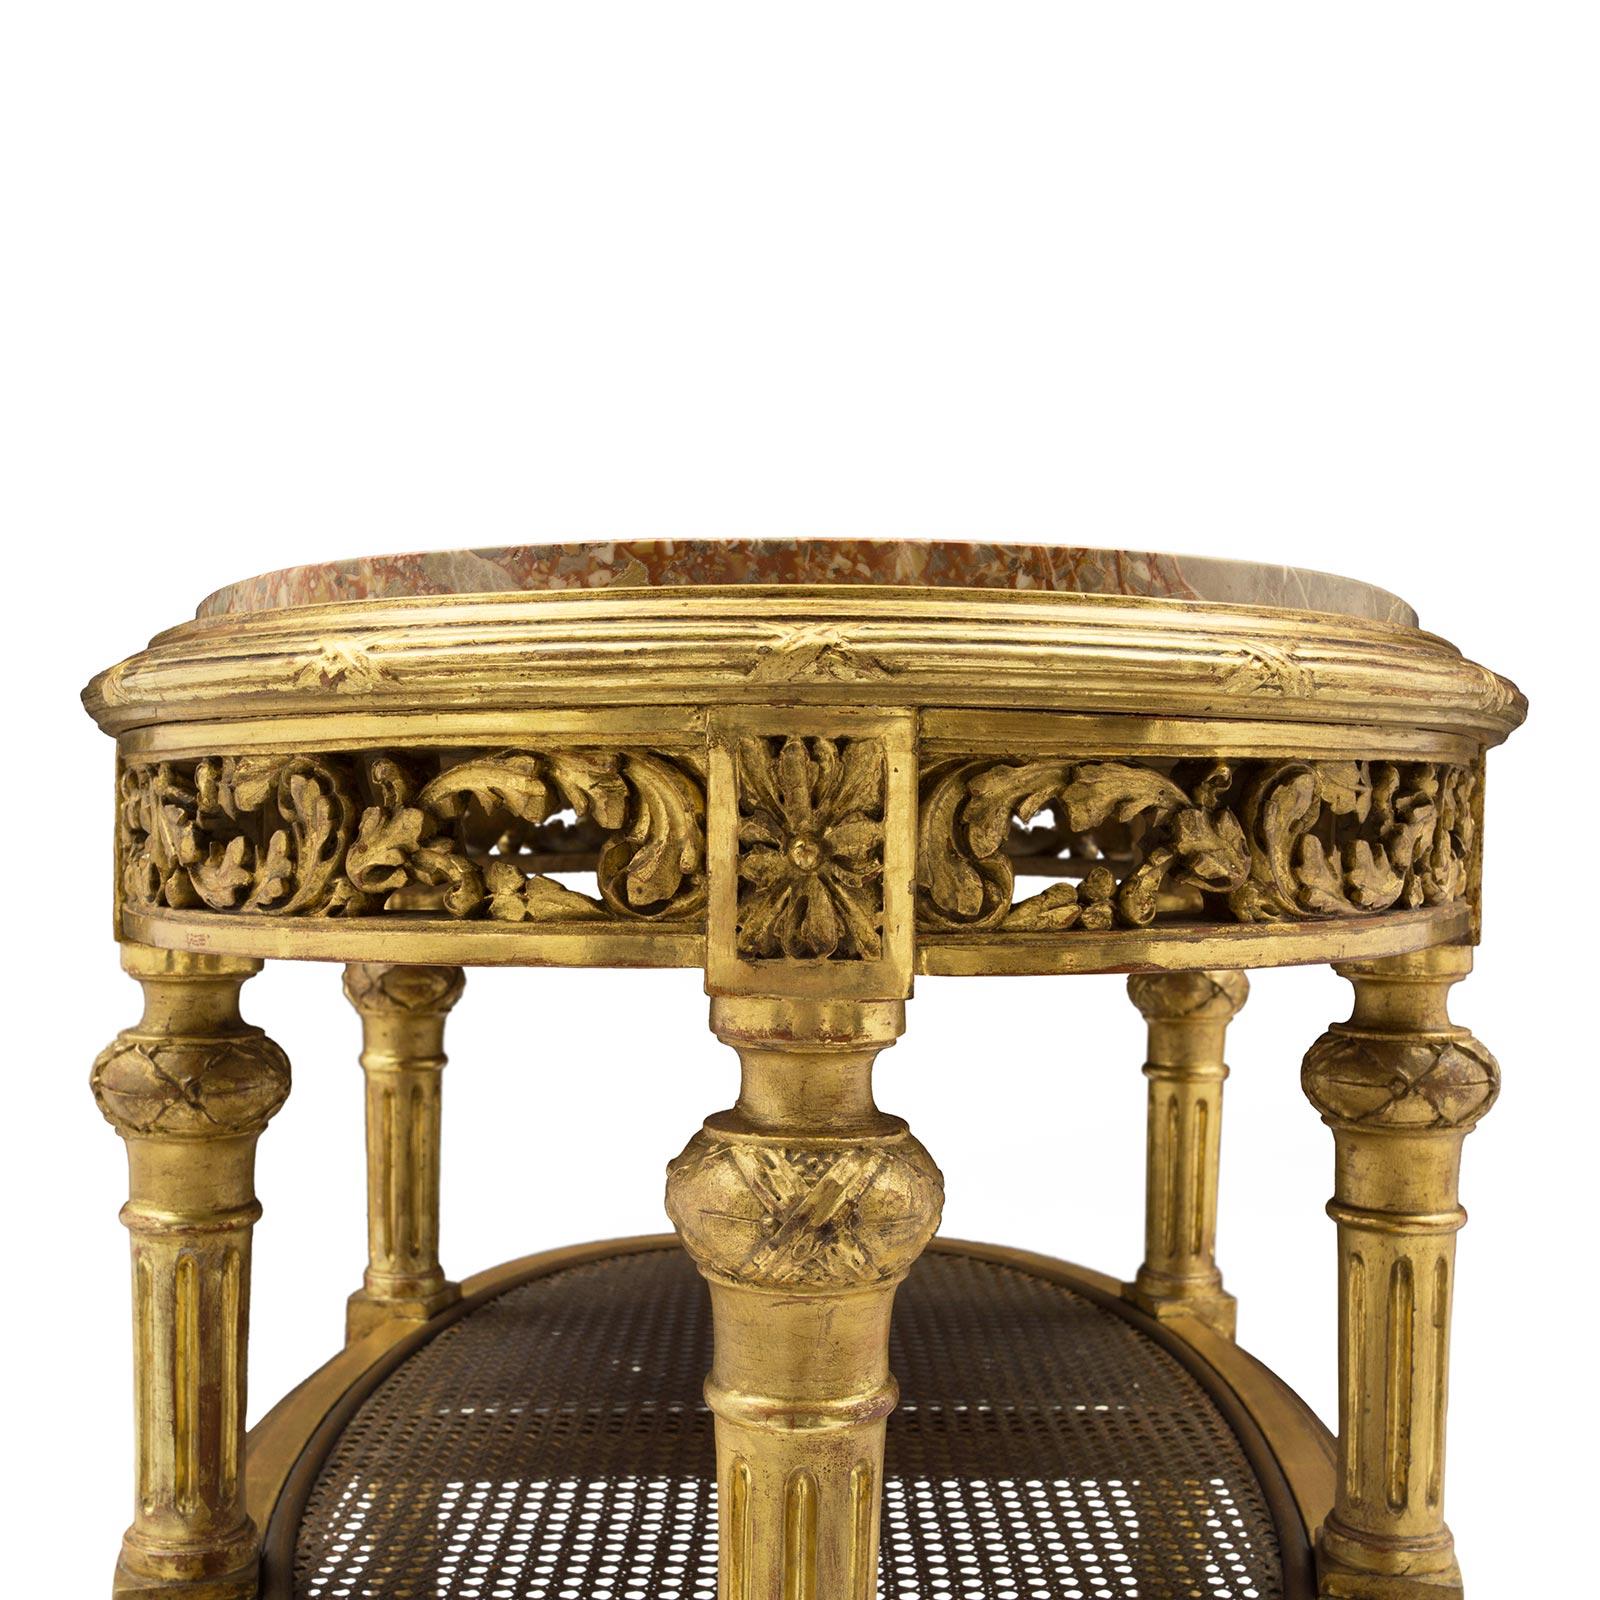 French 19th Century Louis XV Style Three-Tiered Giltwood and Marble Table For Sale 1